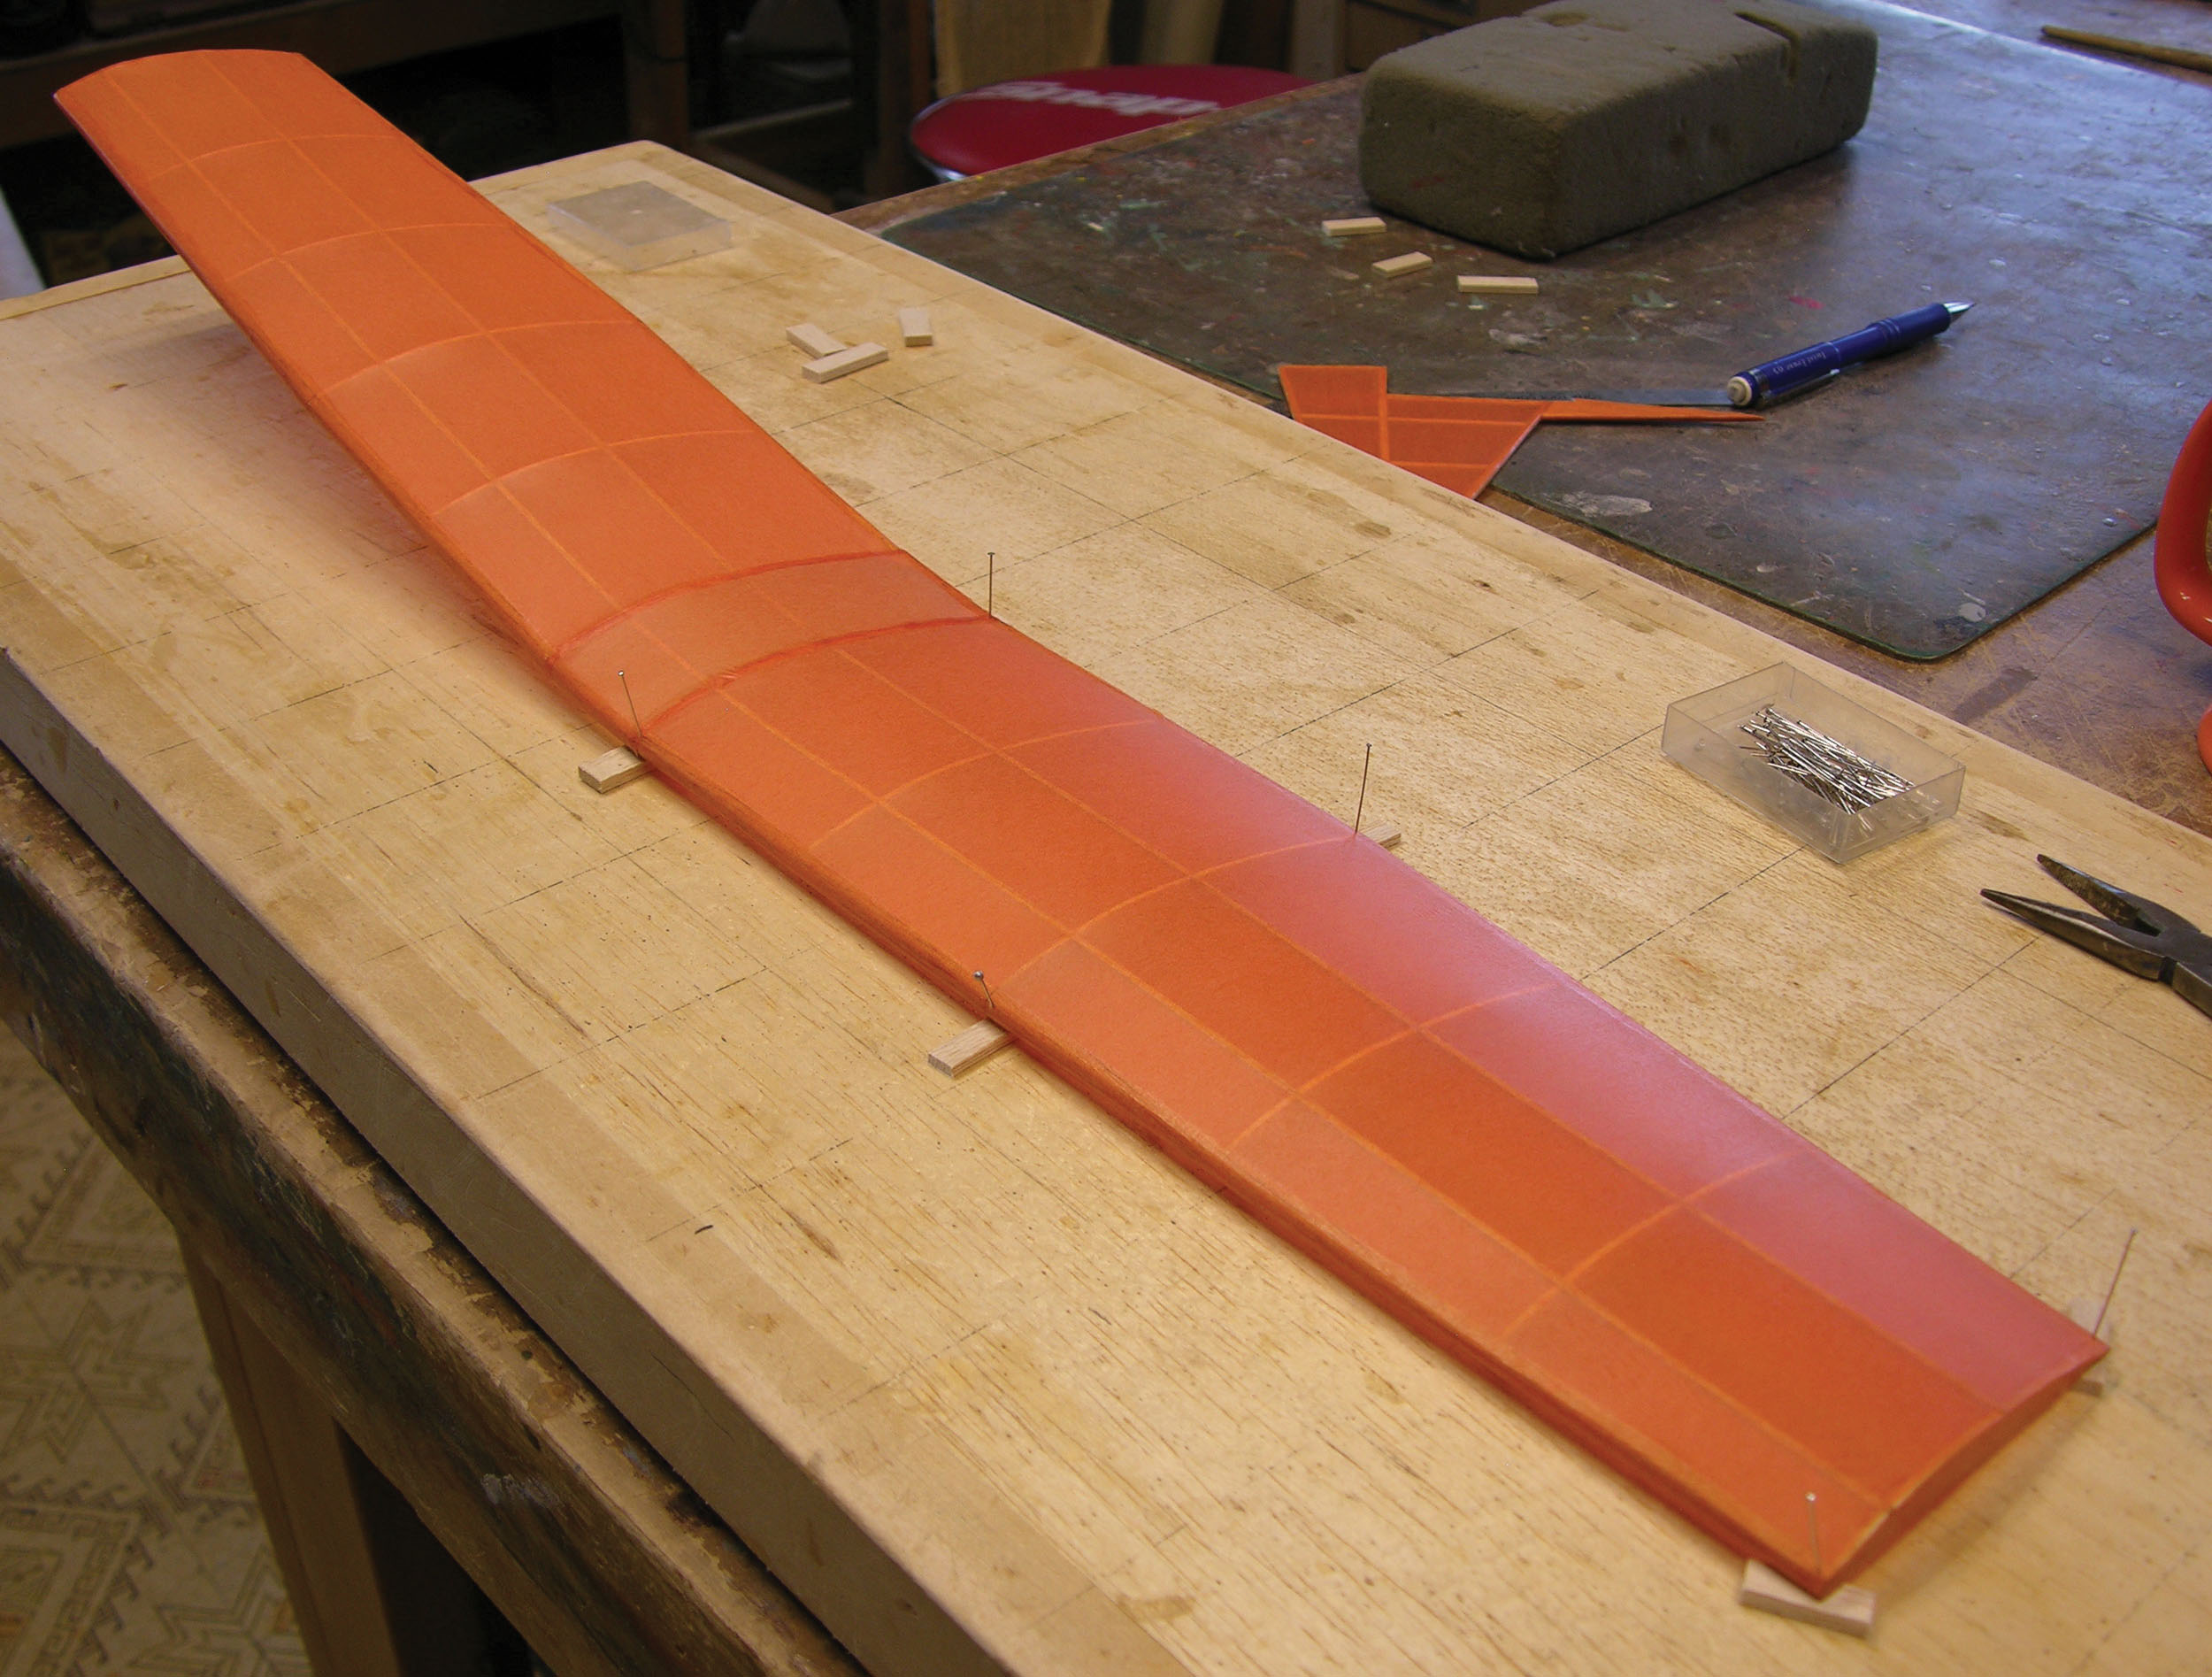 with all of the covering in place on the wing